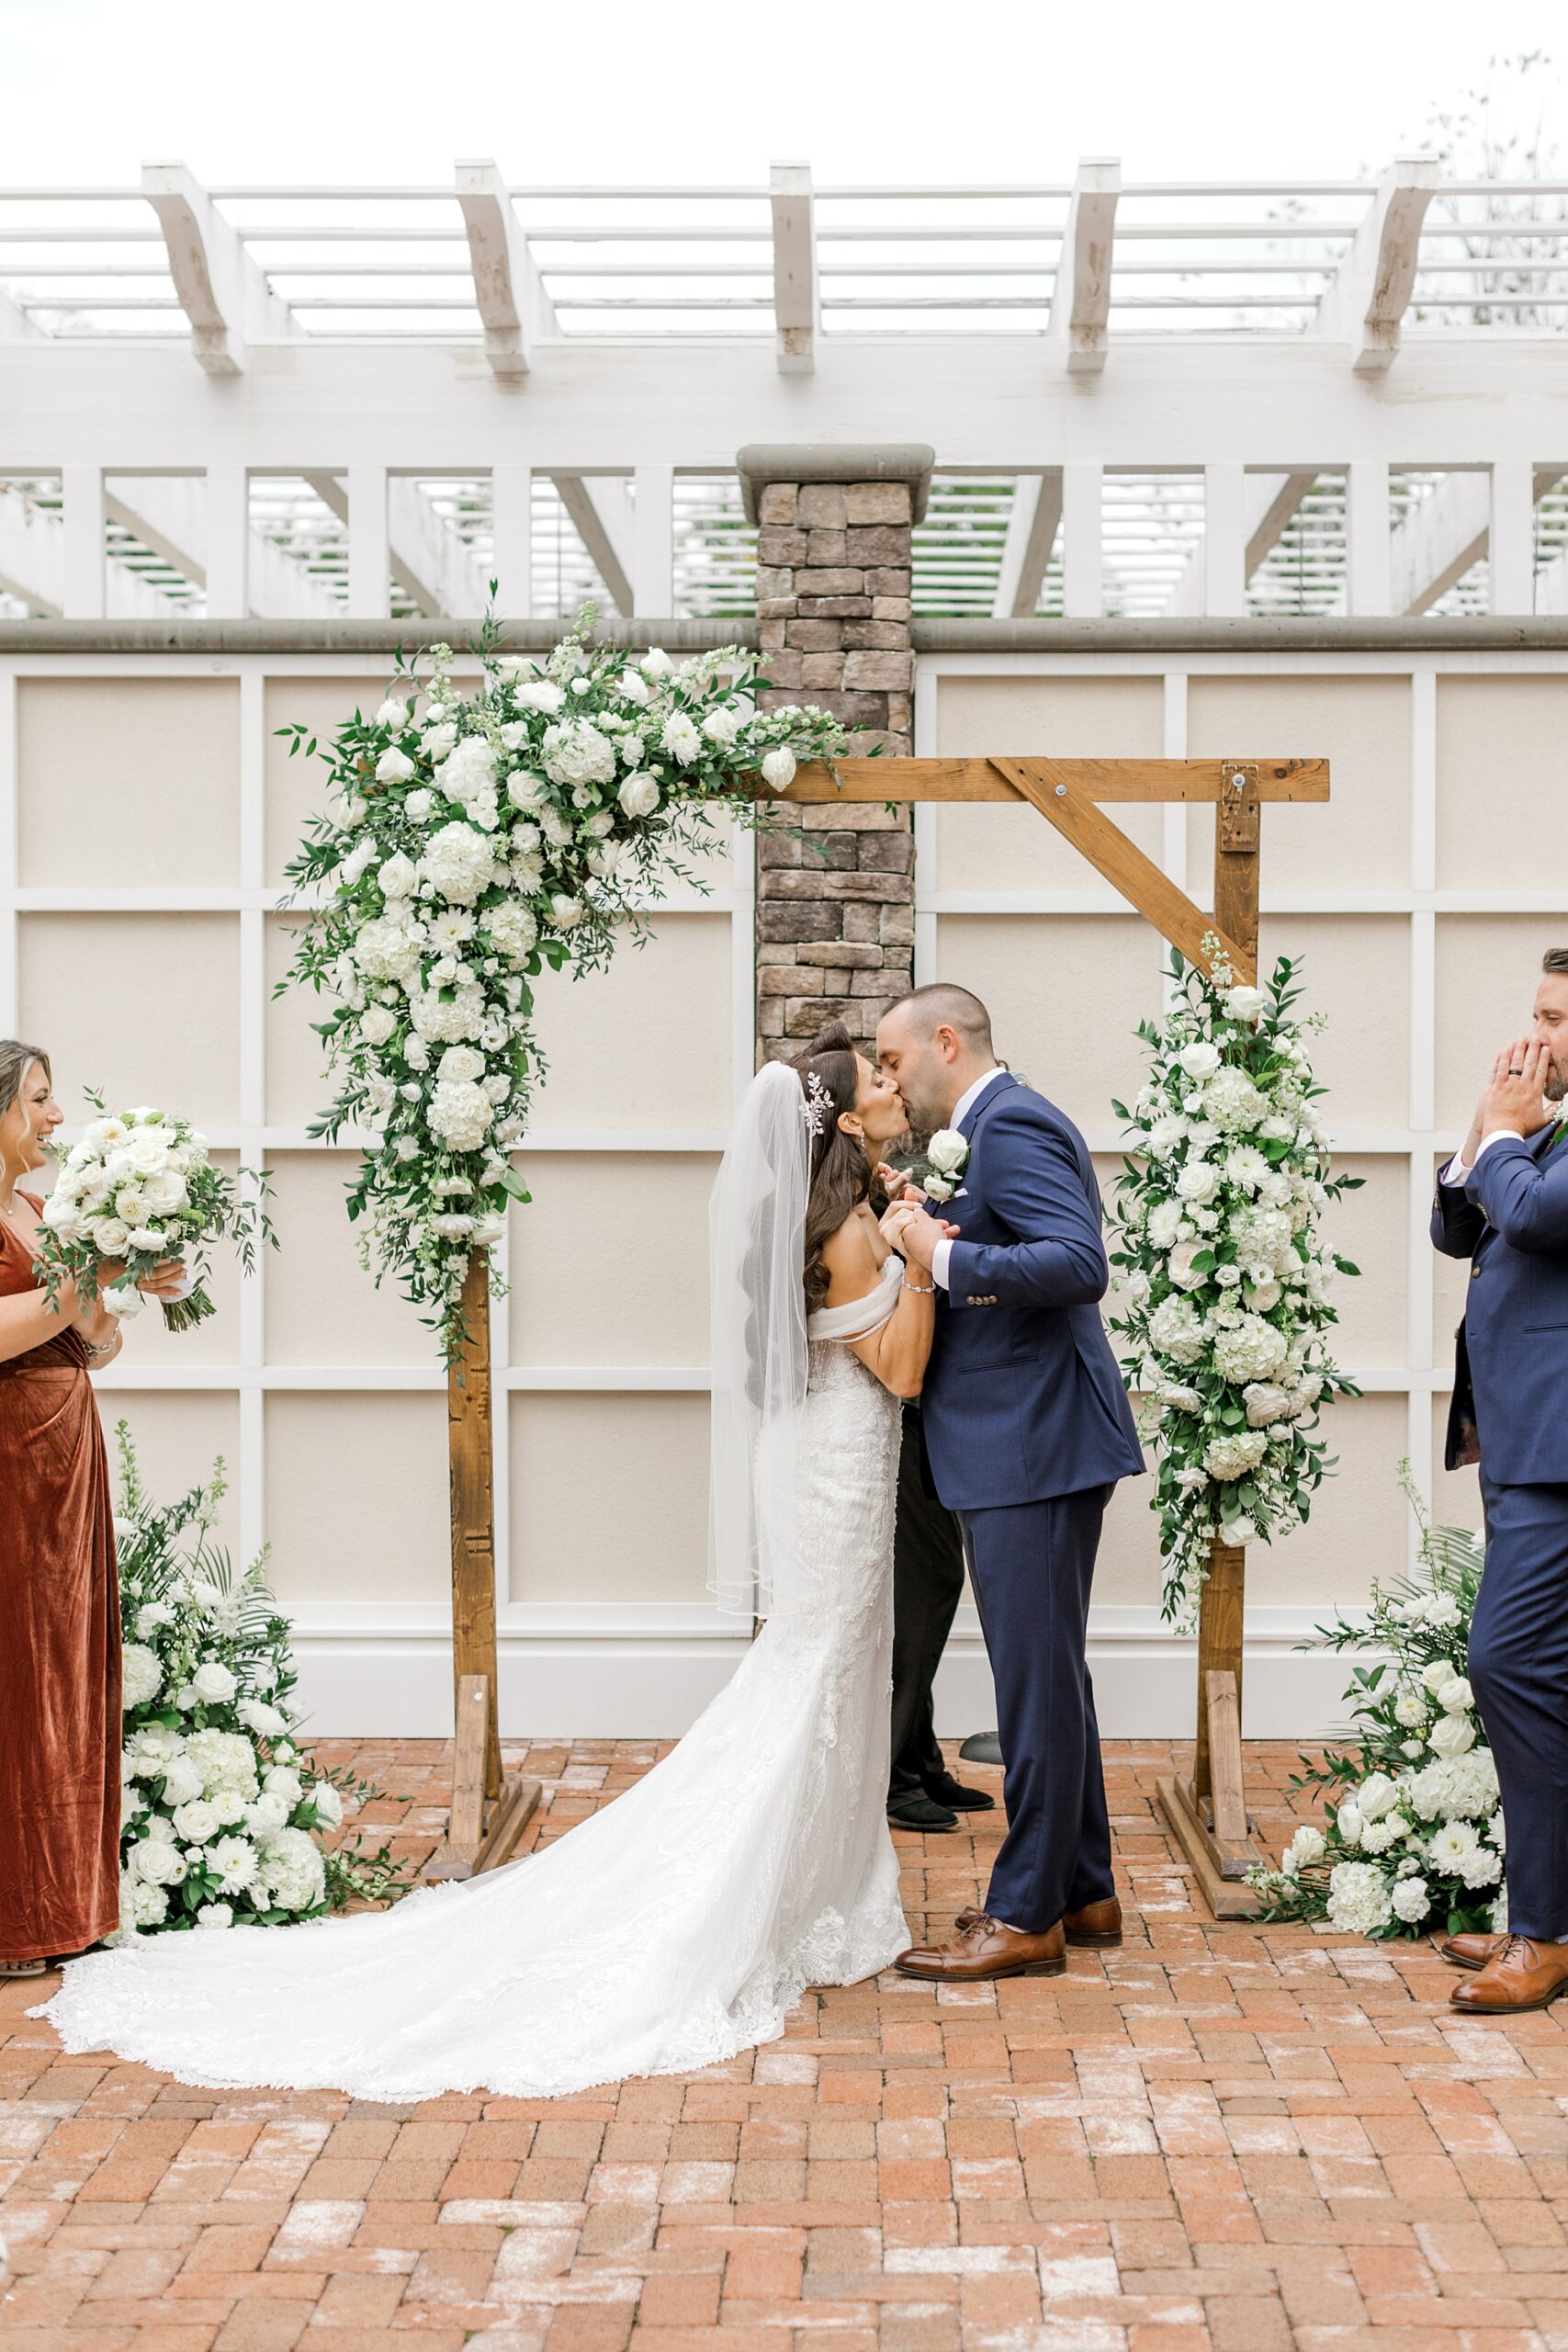 newlyweds kiss under wooden arbor with white flowers during wedding ceremony at Ryland Inn on the patio